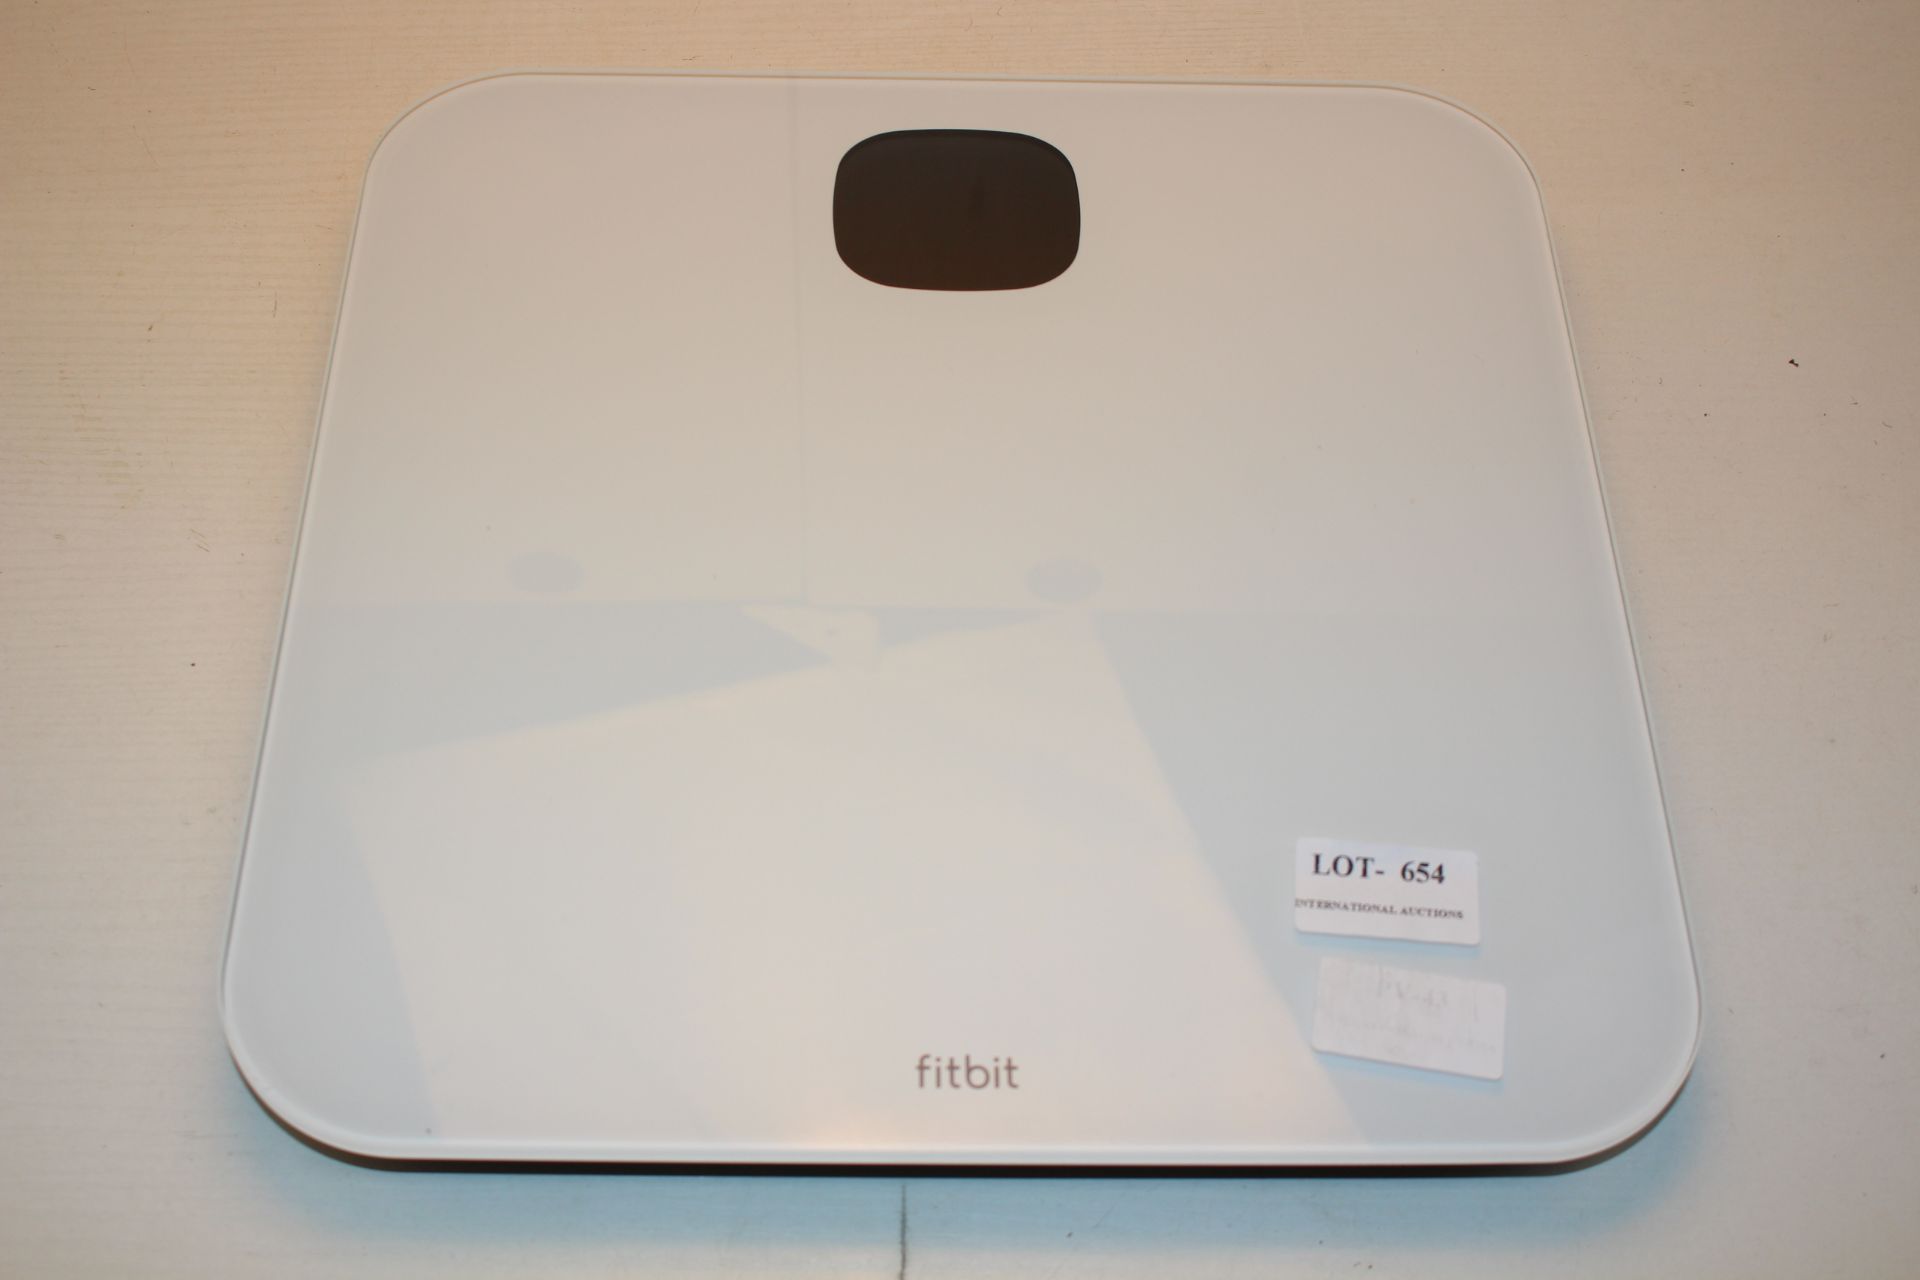 UNBOXED FITBIT ARIA AIR BATHROOM ANALYSER SCALES RRP £49.99Condition ReportAppraisal Available on